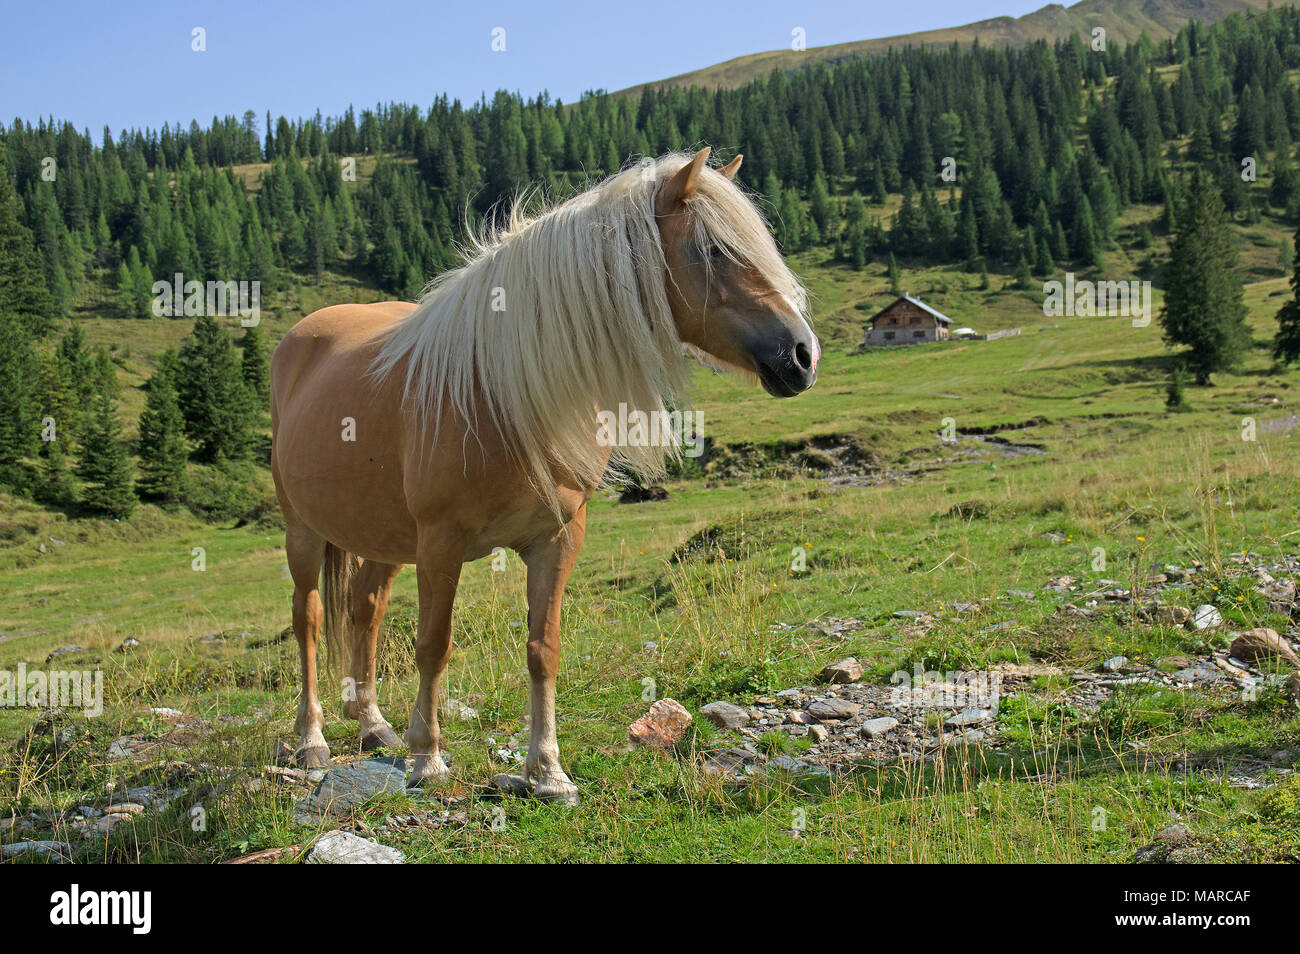 Haflinger Horse. Adult standing on a mountain pasture. Rauris Valley, High Tauern, Austria Stock Photo